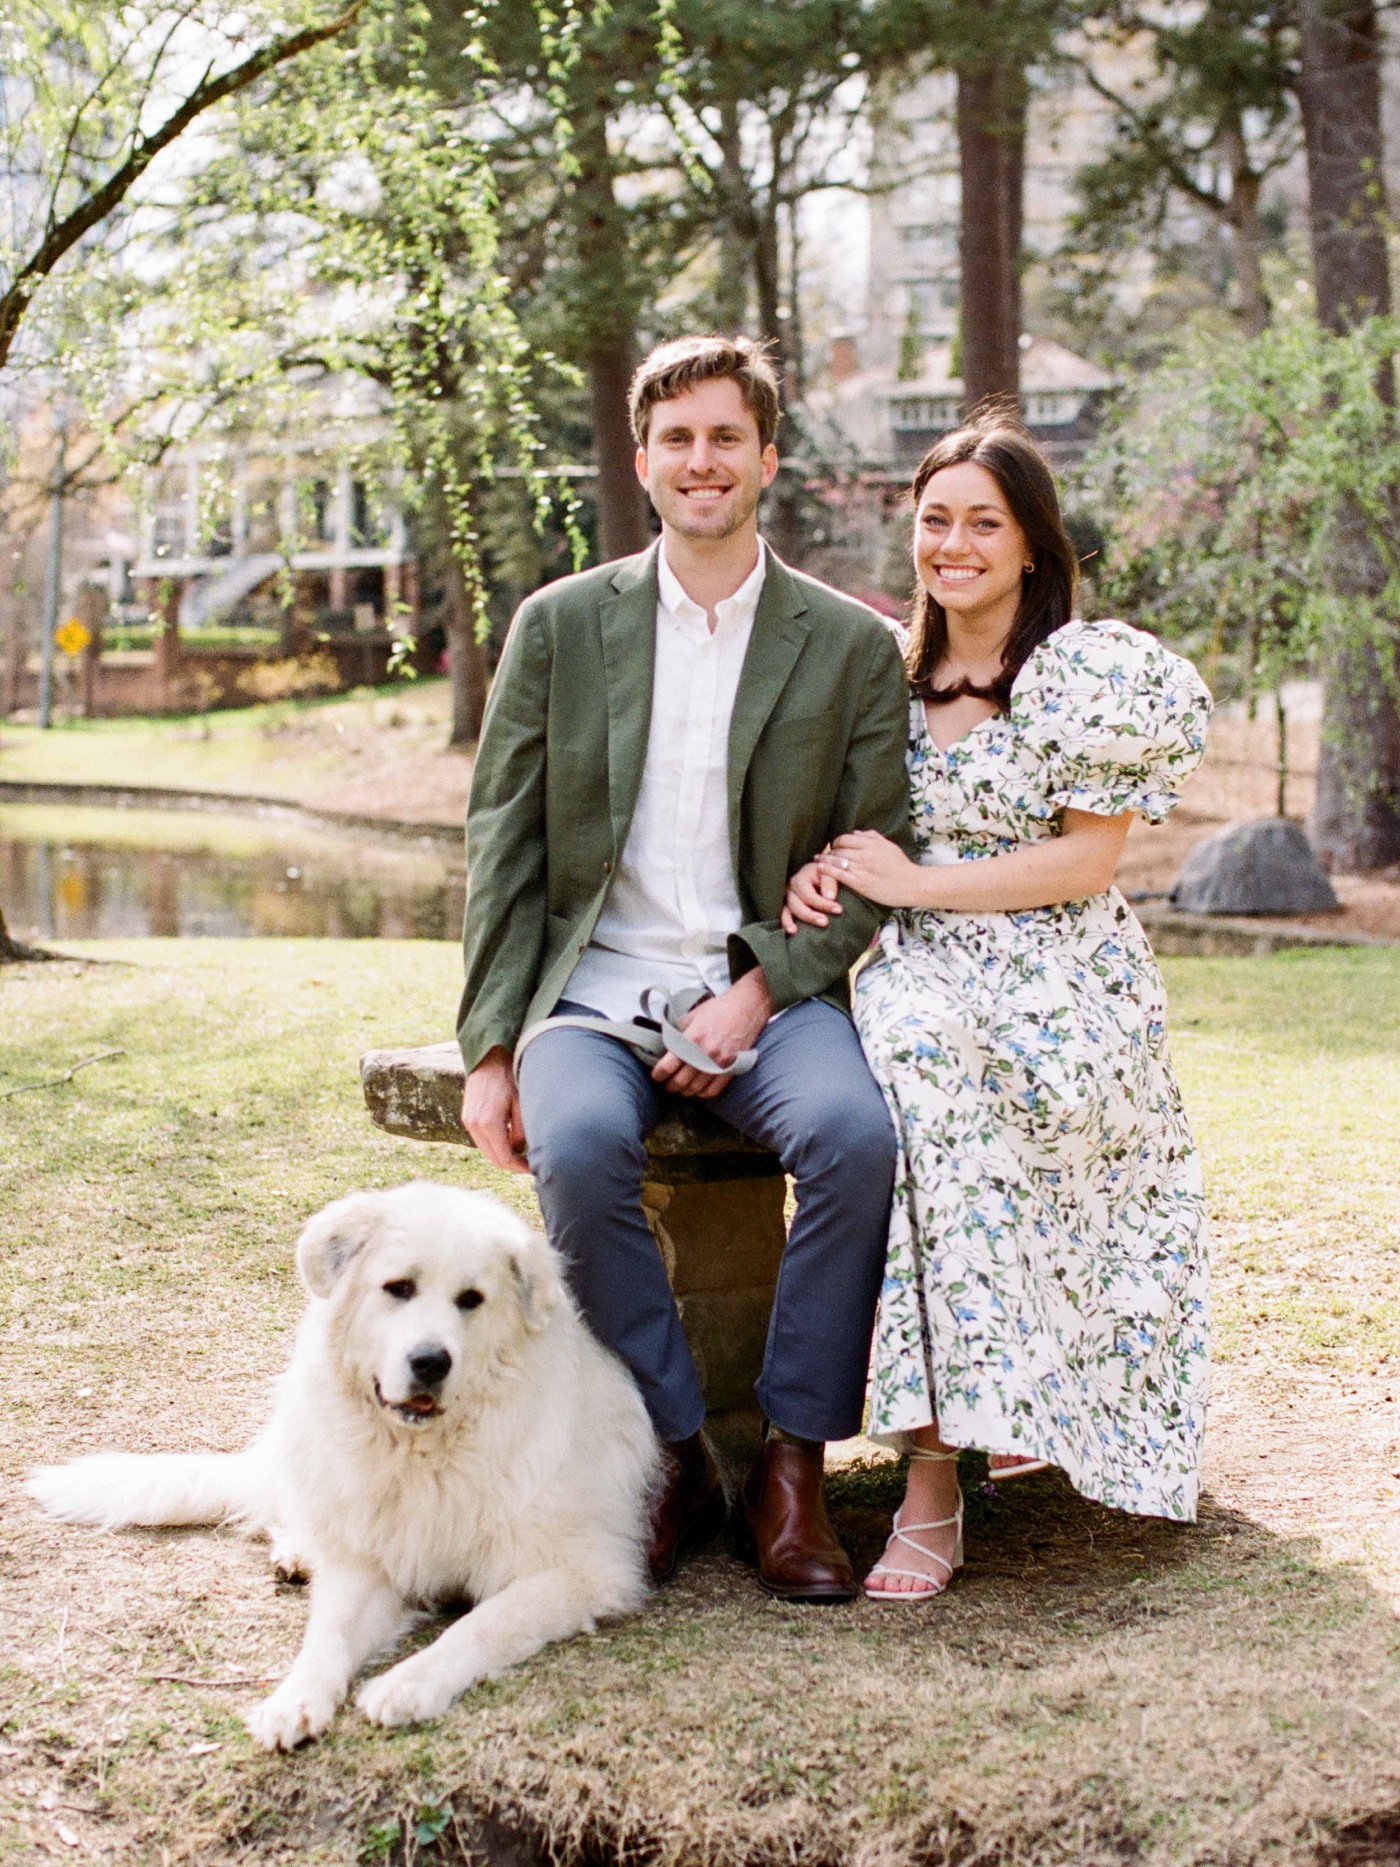 Engagement photos with dogs